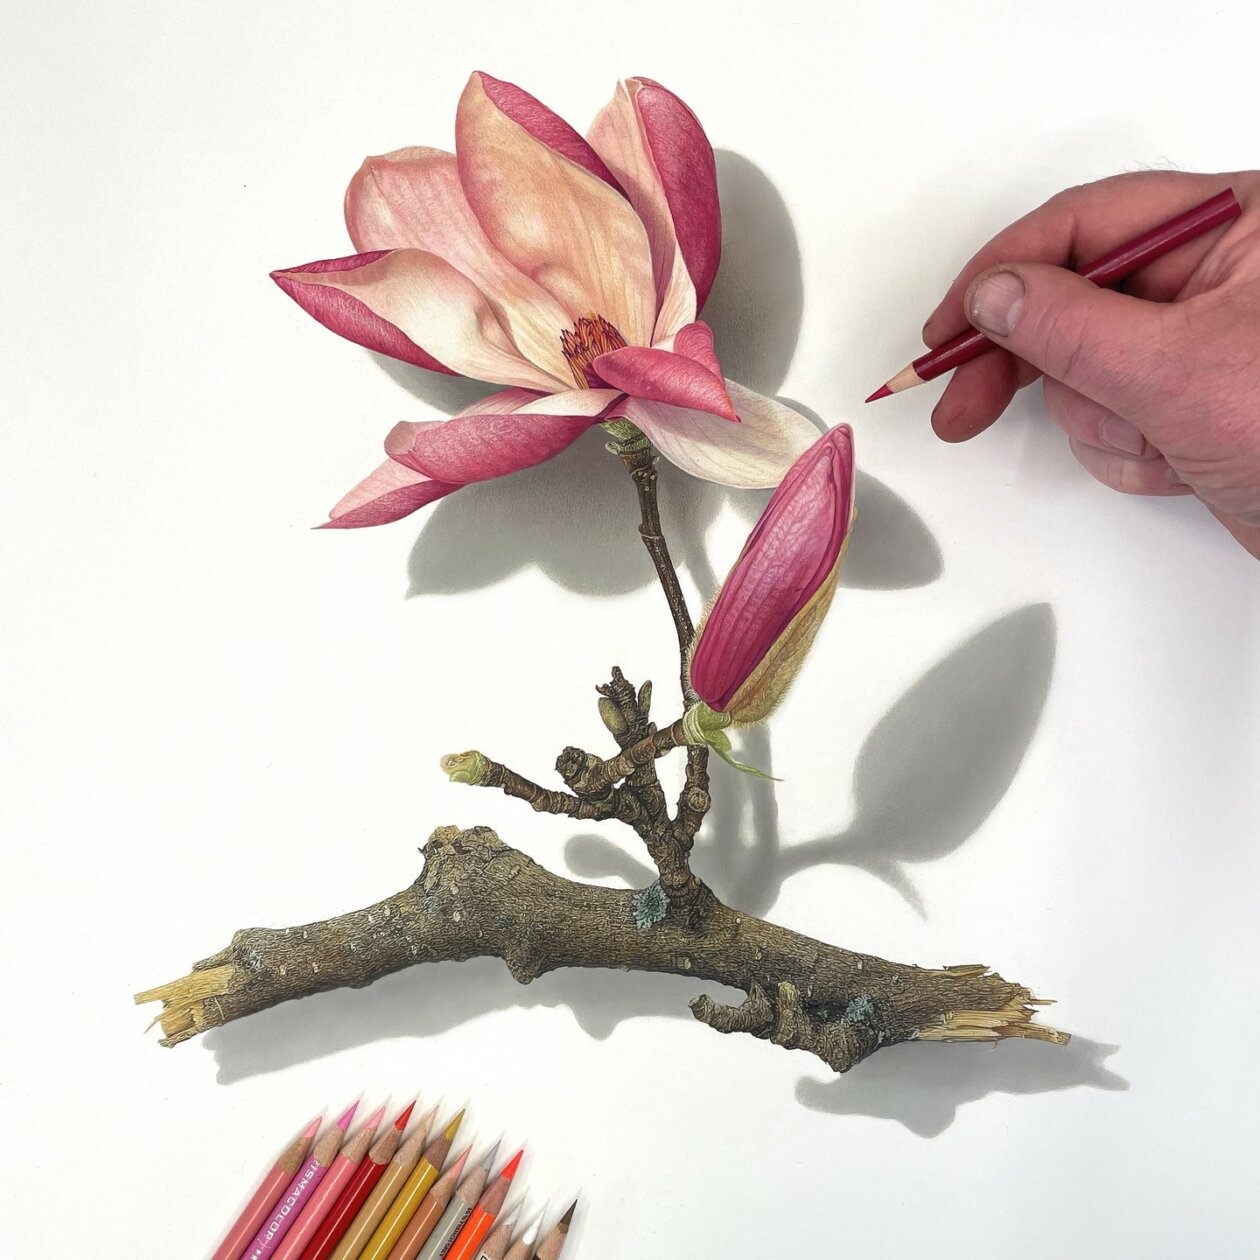 Hyperrealistic Drawings Of Buds, Branches, And Tree Trunks By David Morrison (1)